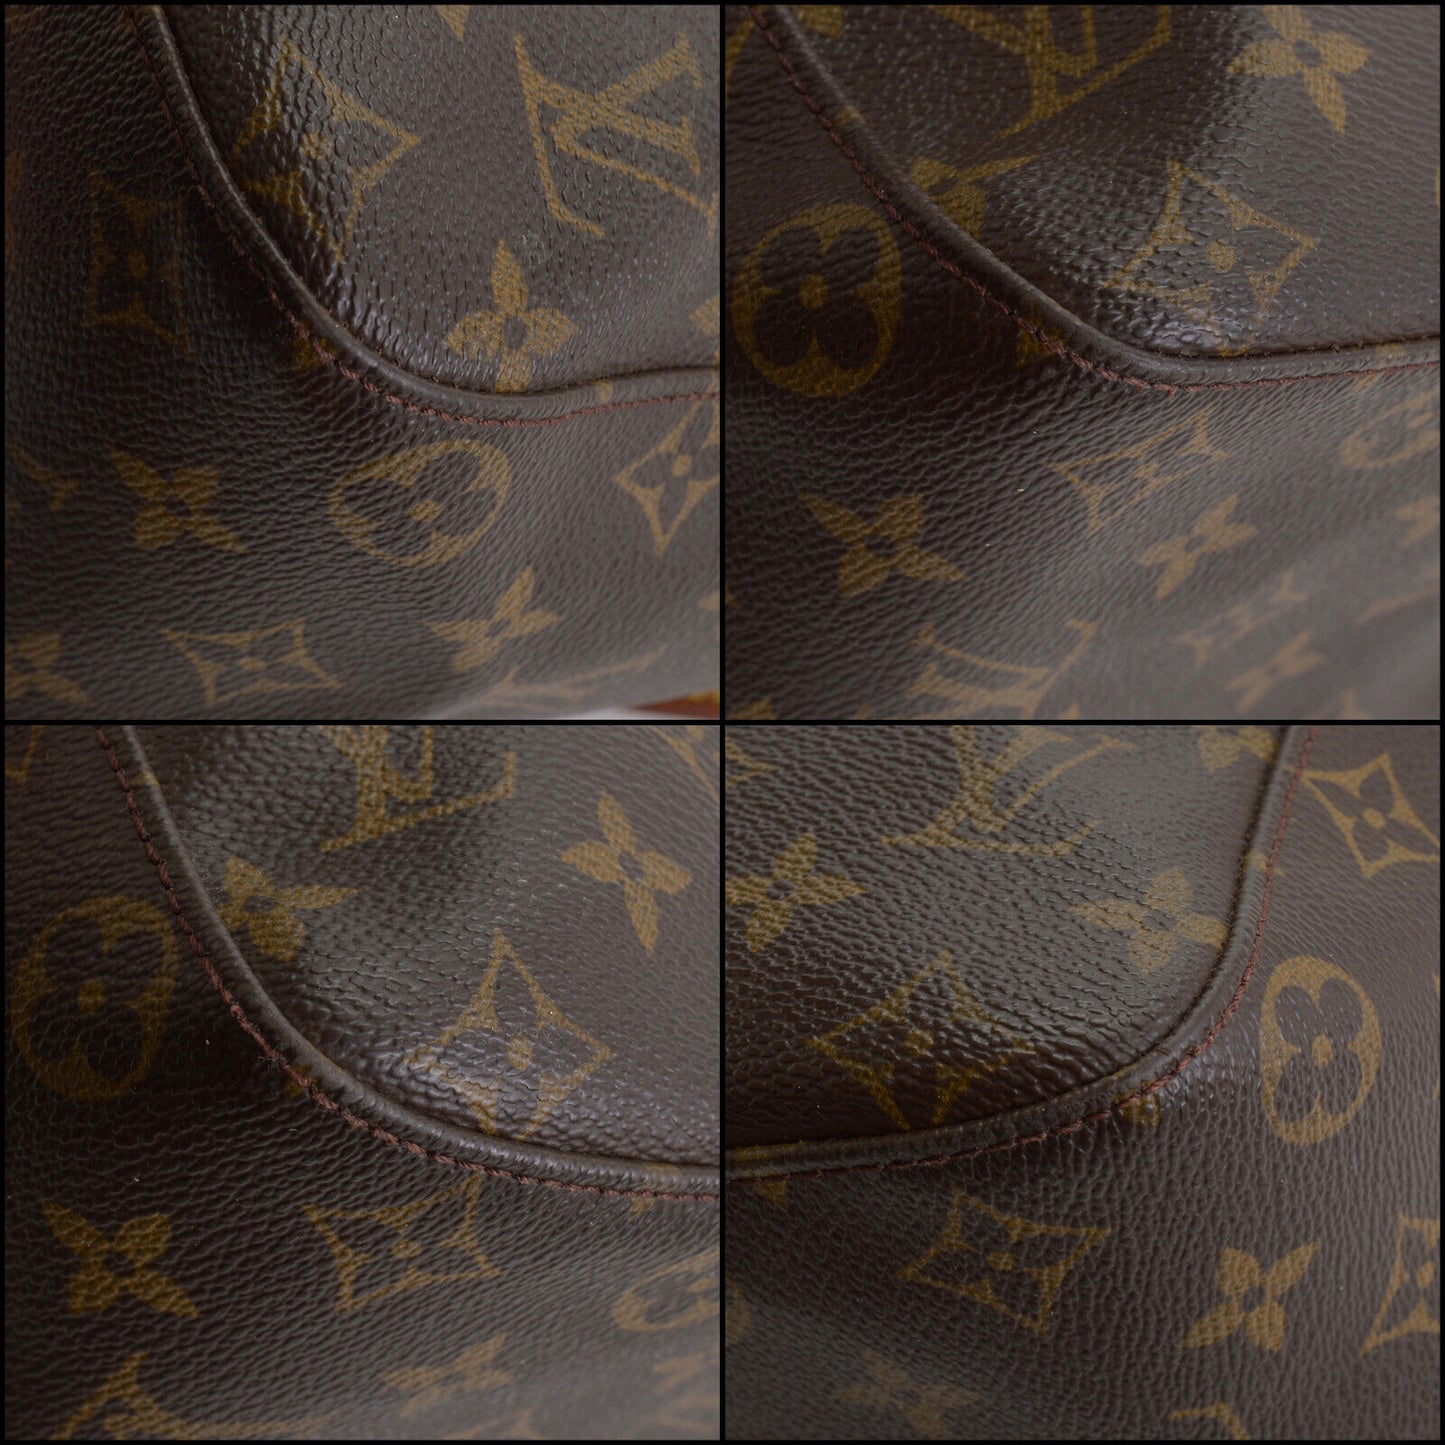 RDC13551 Authentic LOUIS VUITTON Monogram Canvas Looping GM Bag – REAL DEAL  COLLECTION